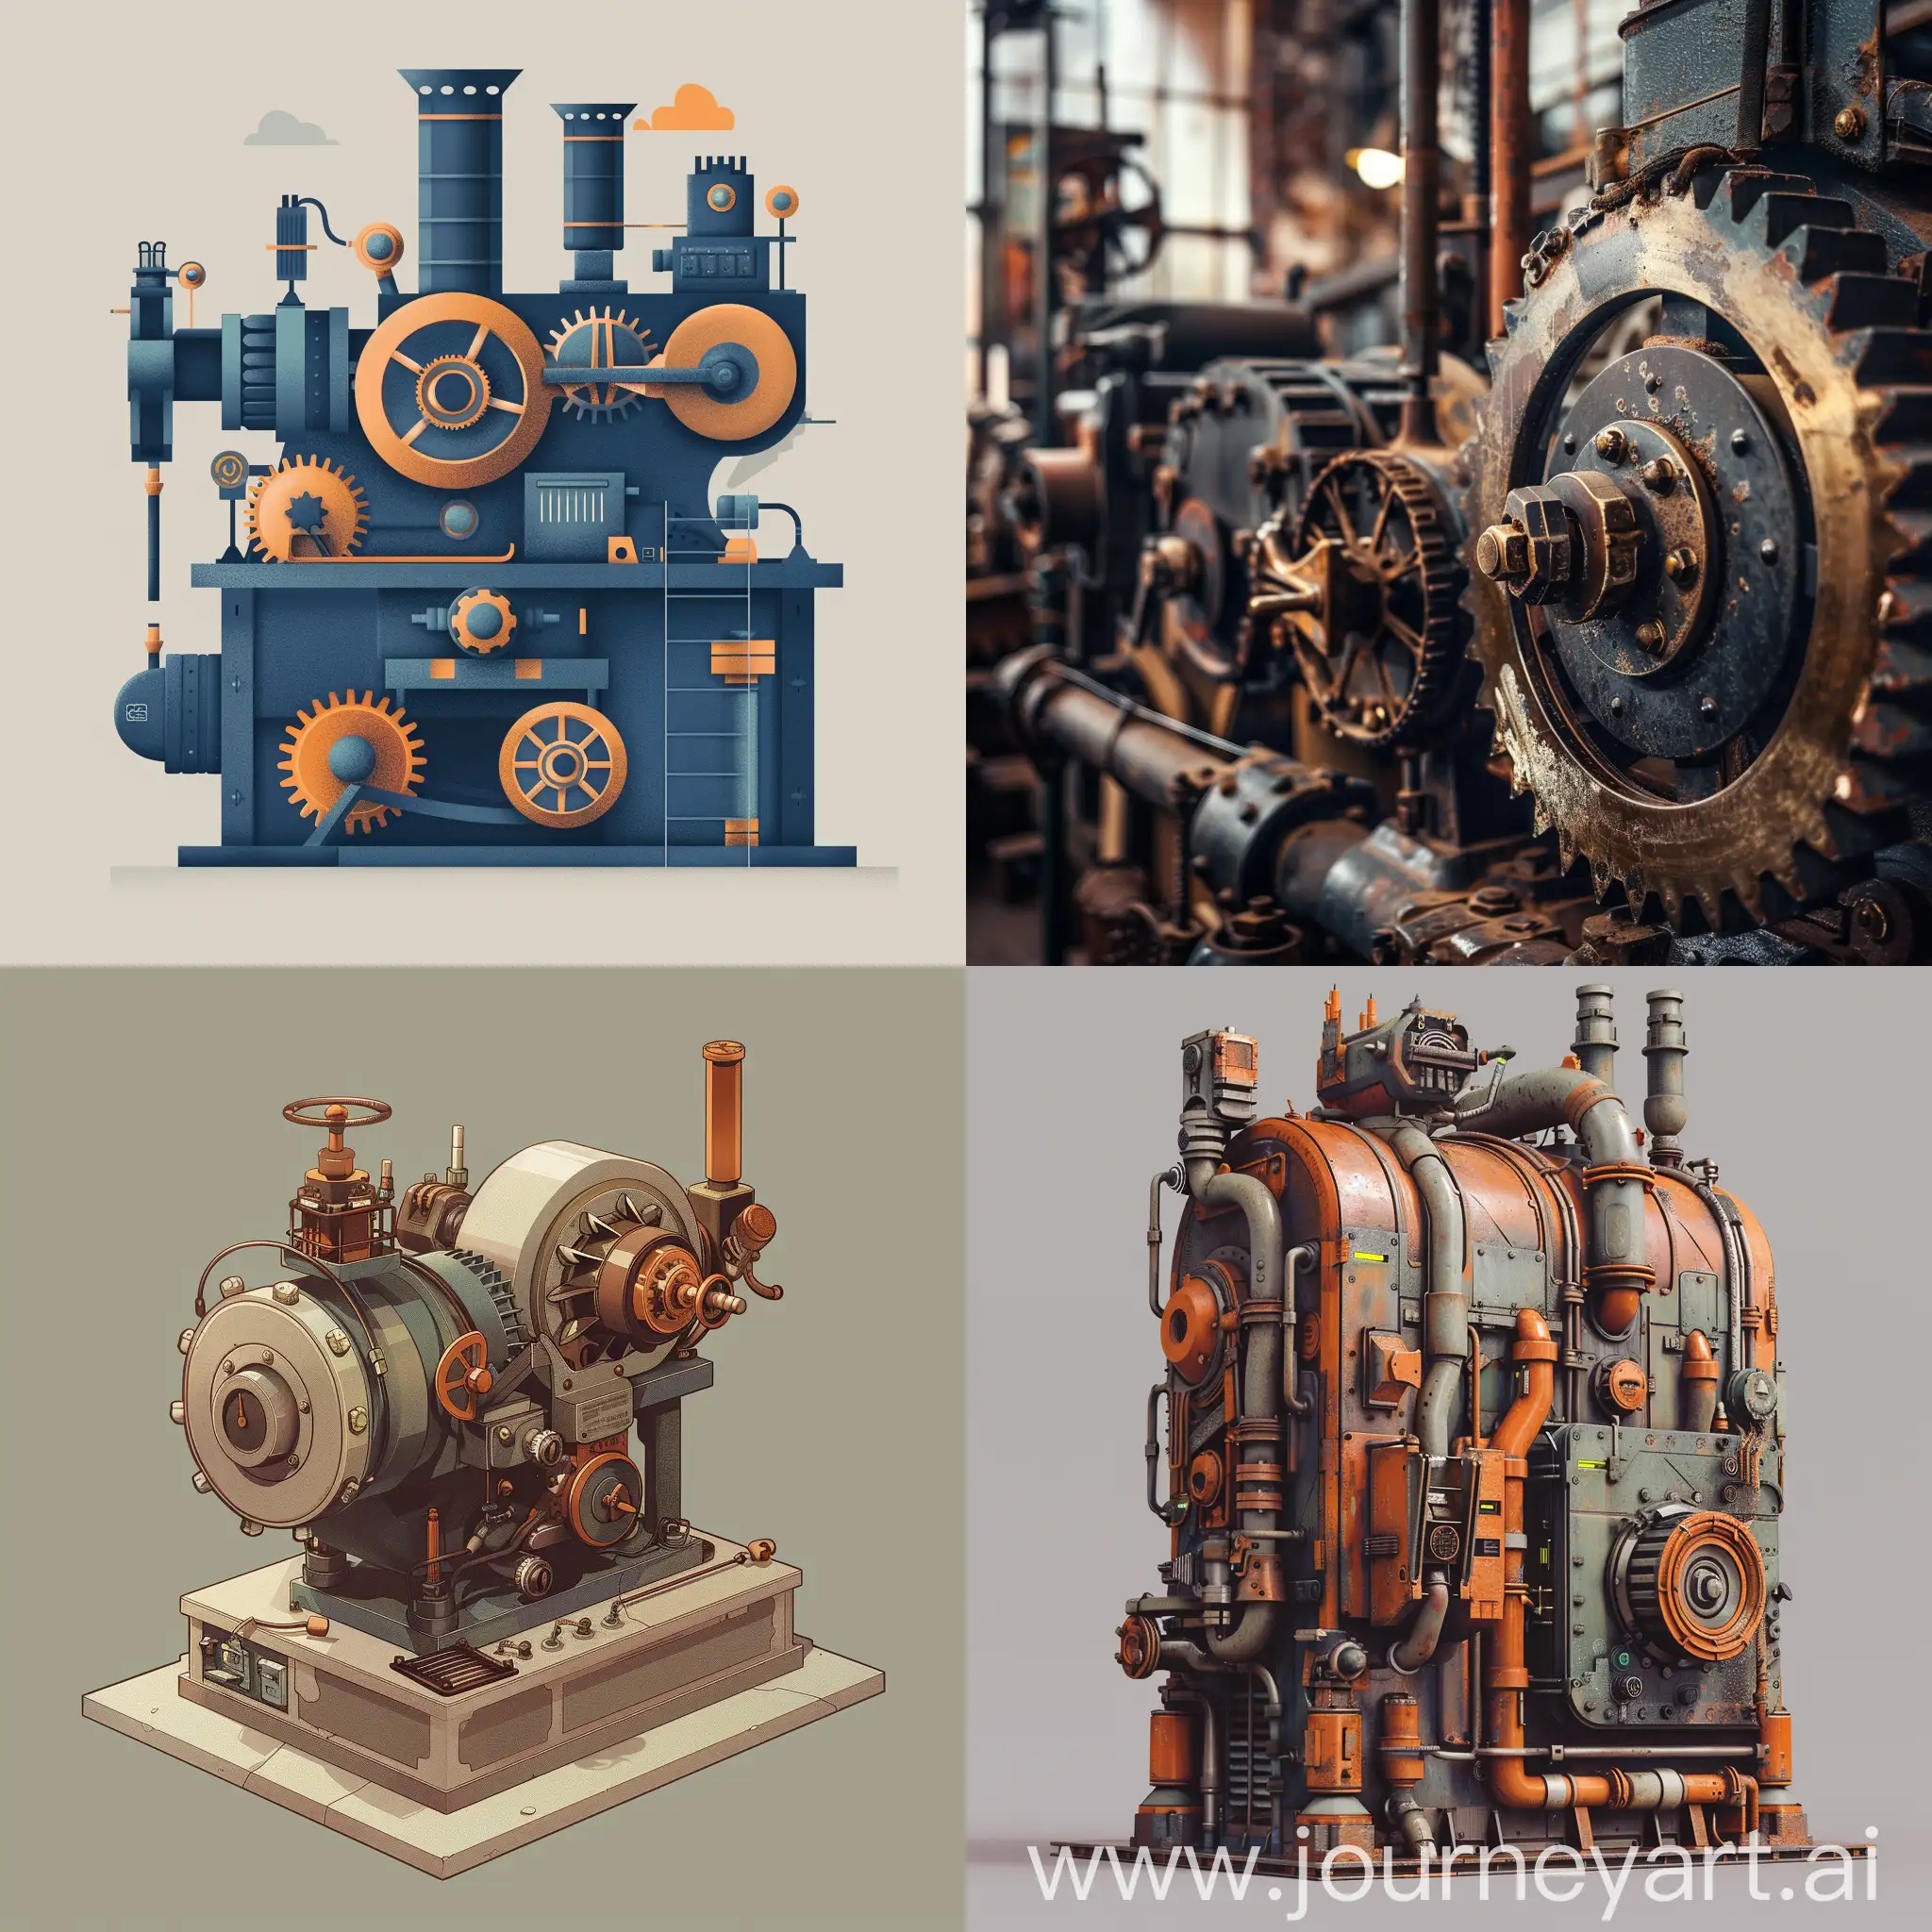 Industrial-Machinery-Website-Design-Dynamic-and-Efficient-Equipment-Showcase